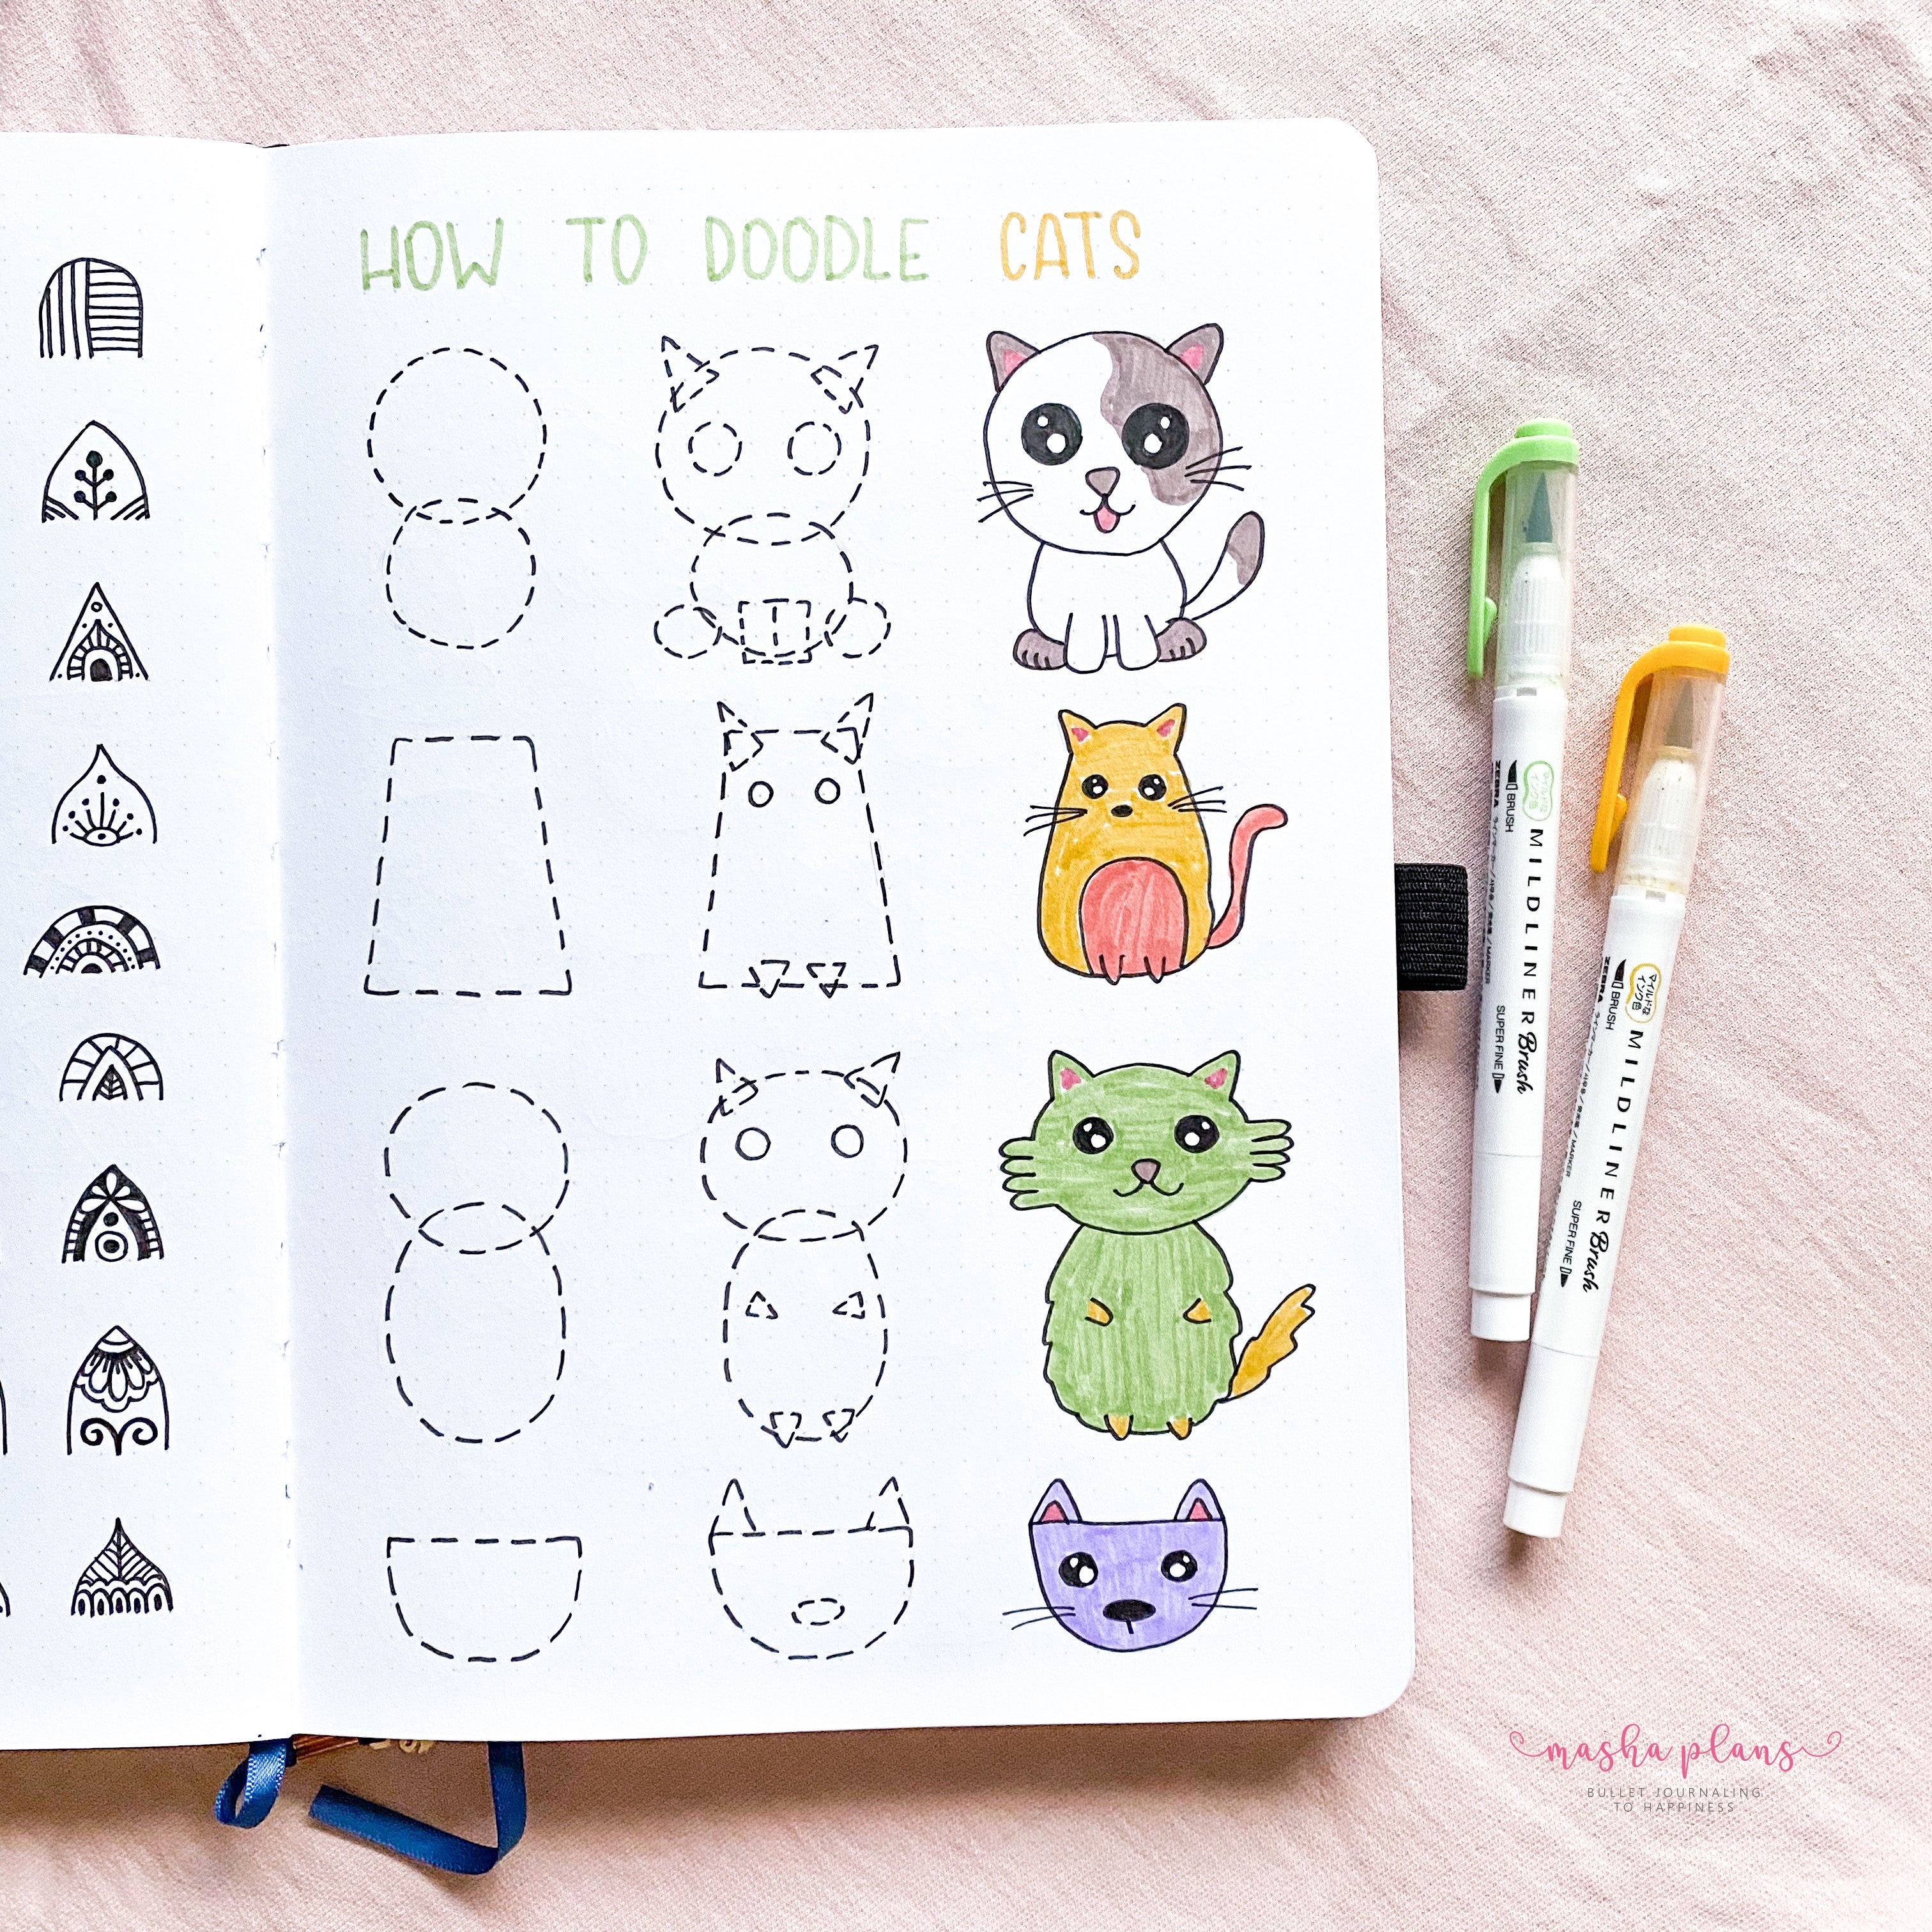 masha plans, how to doodle, tutorial, archer and olive, cats, cat doodles